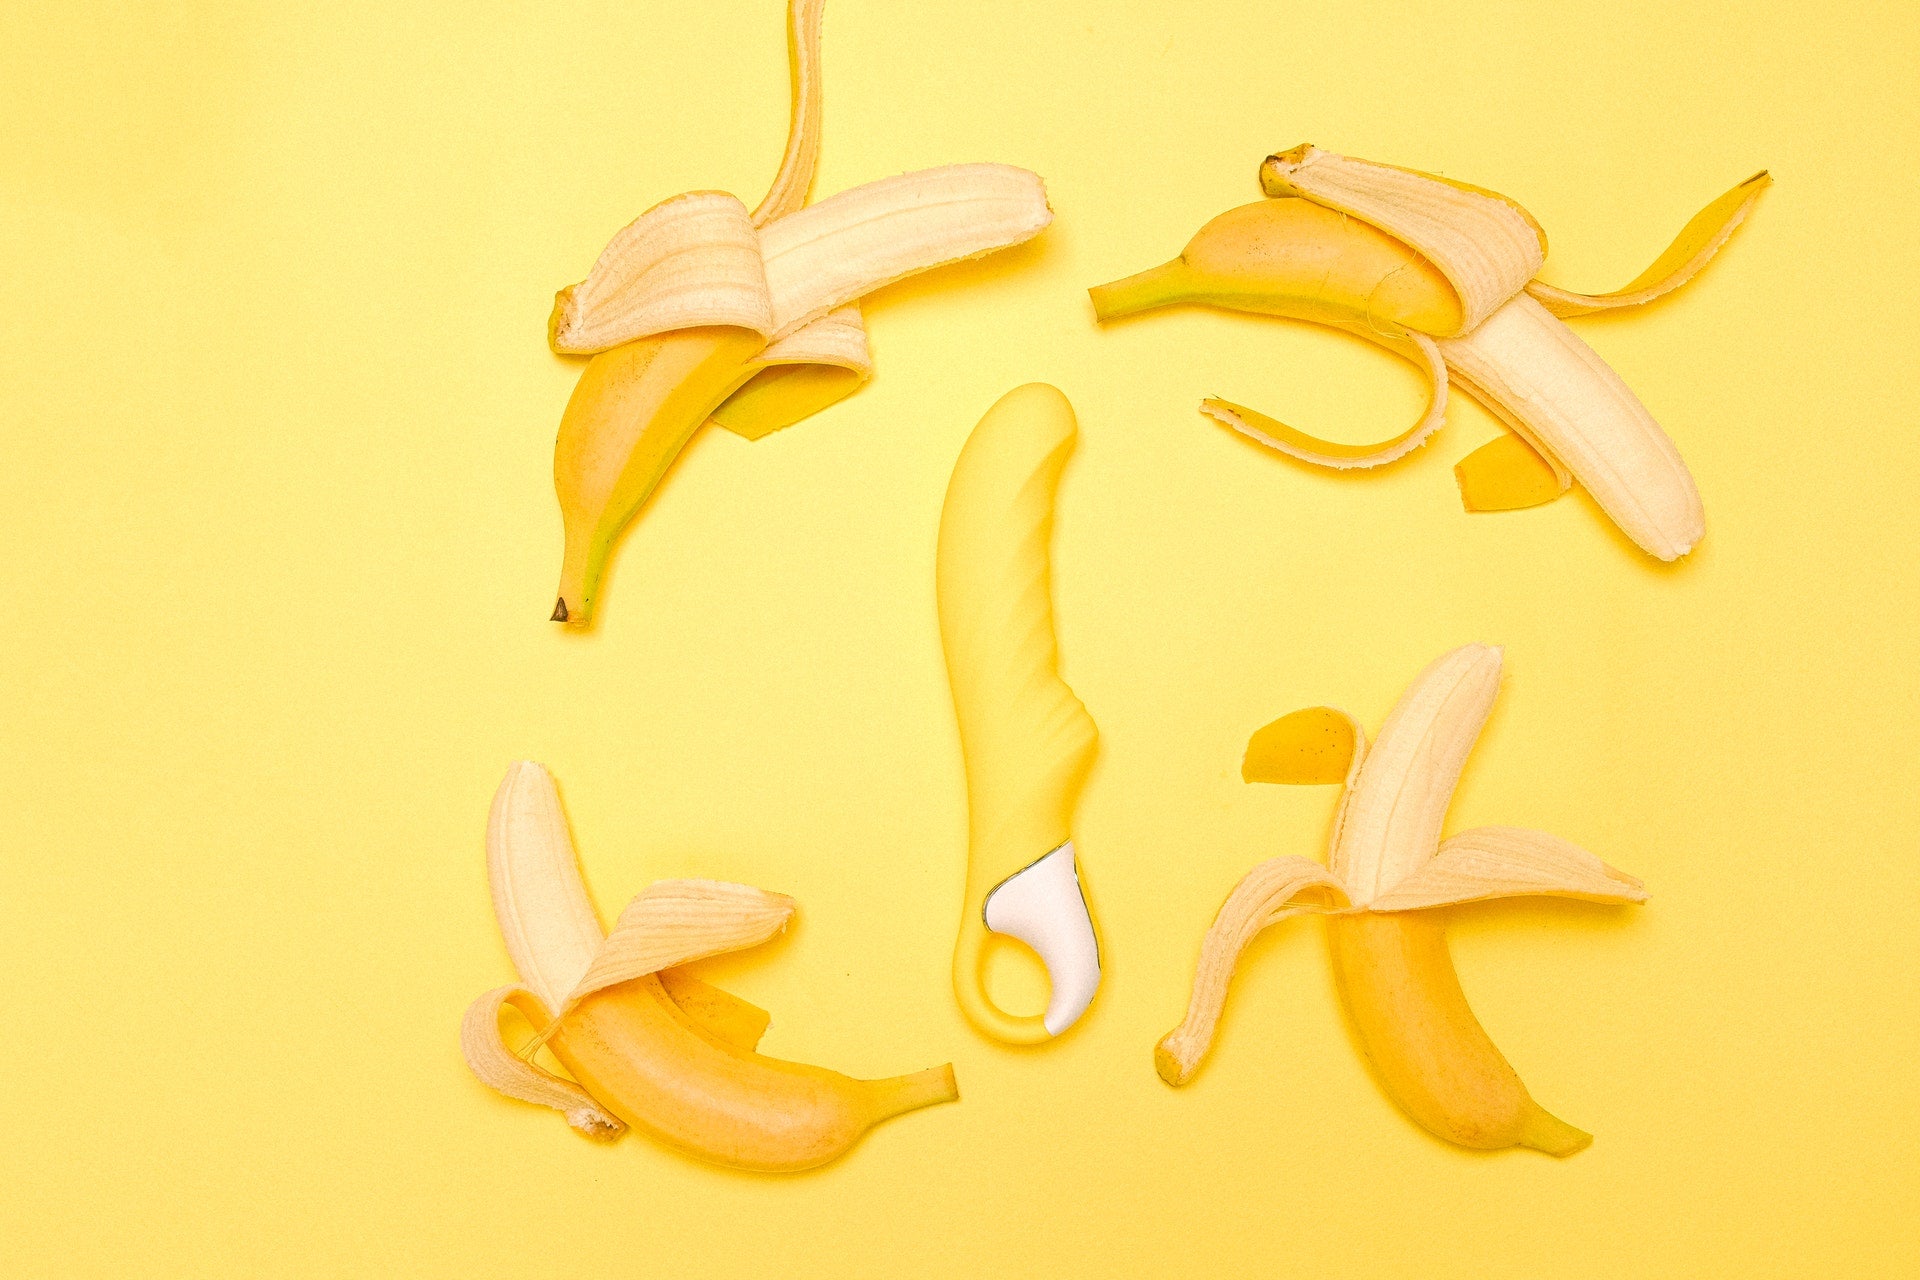 Bananas and Sex Toys